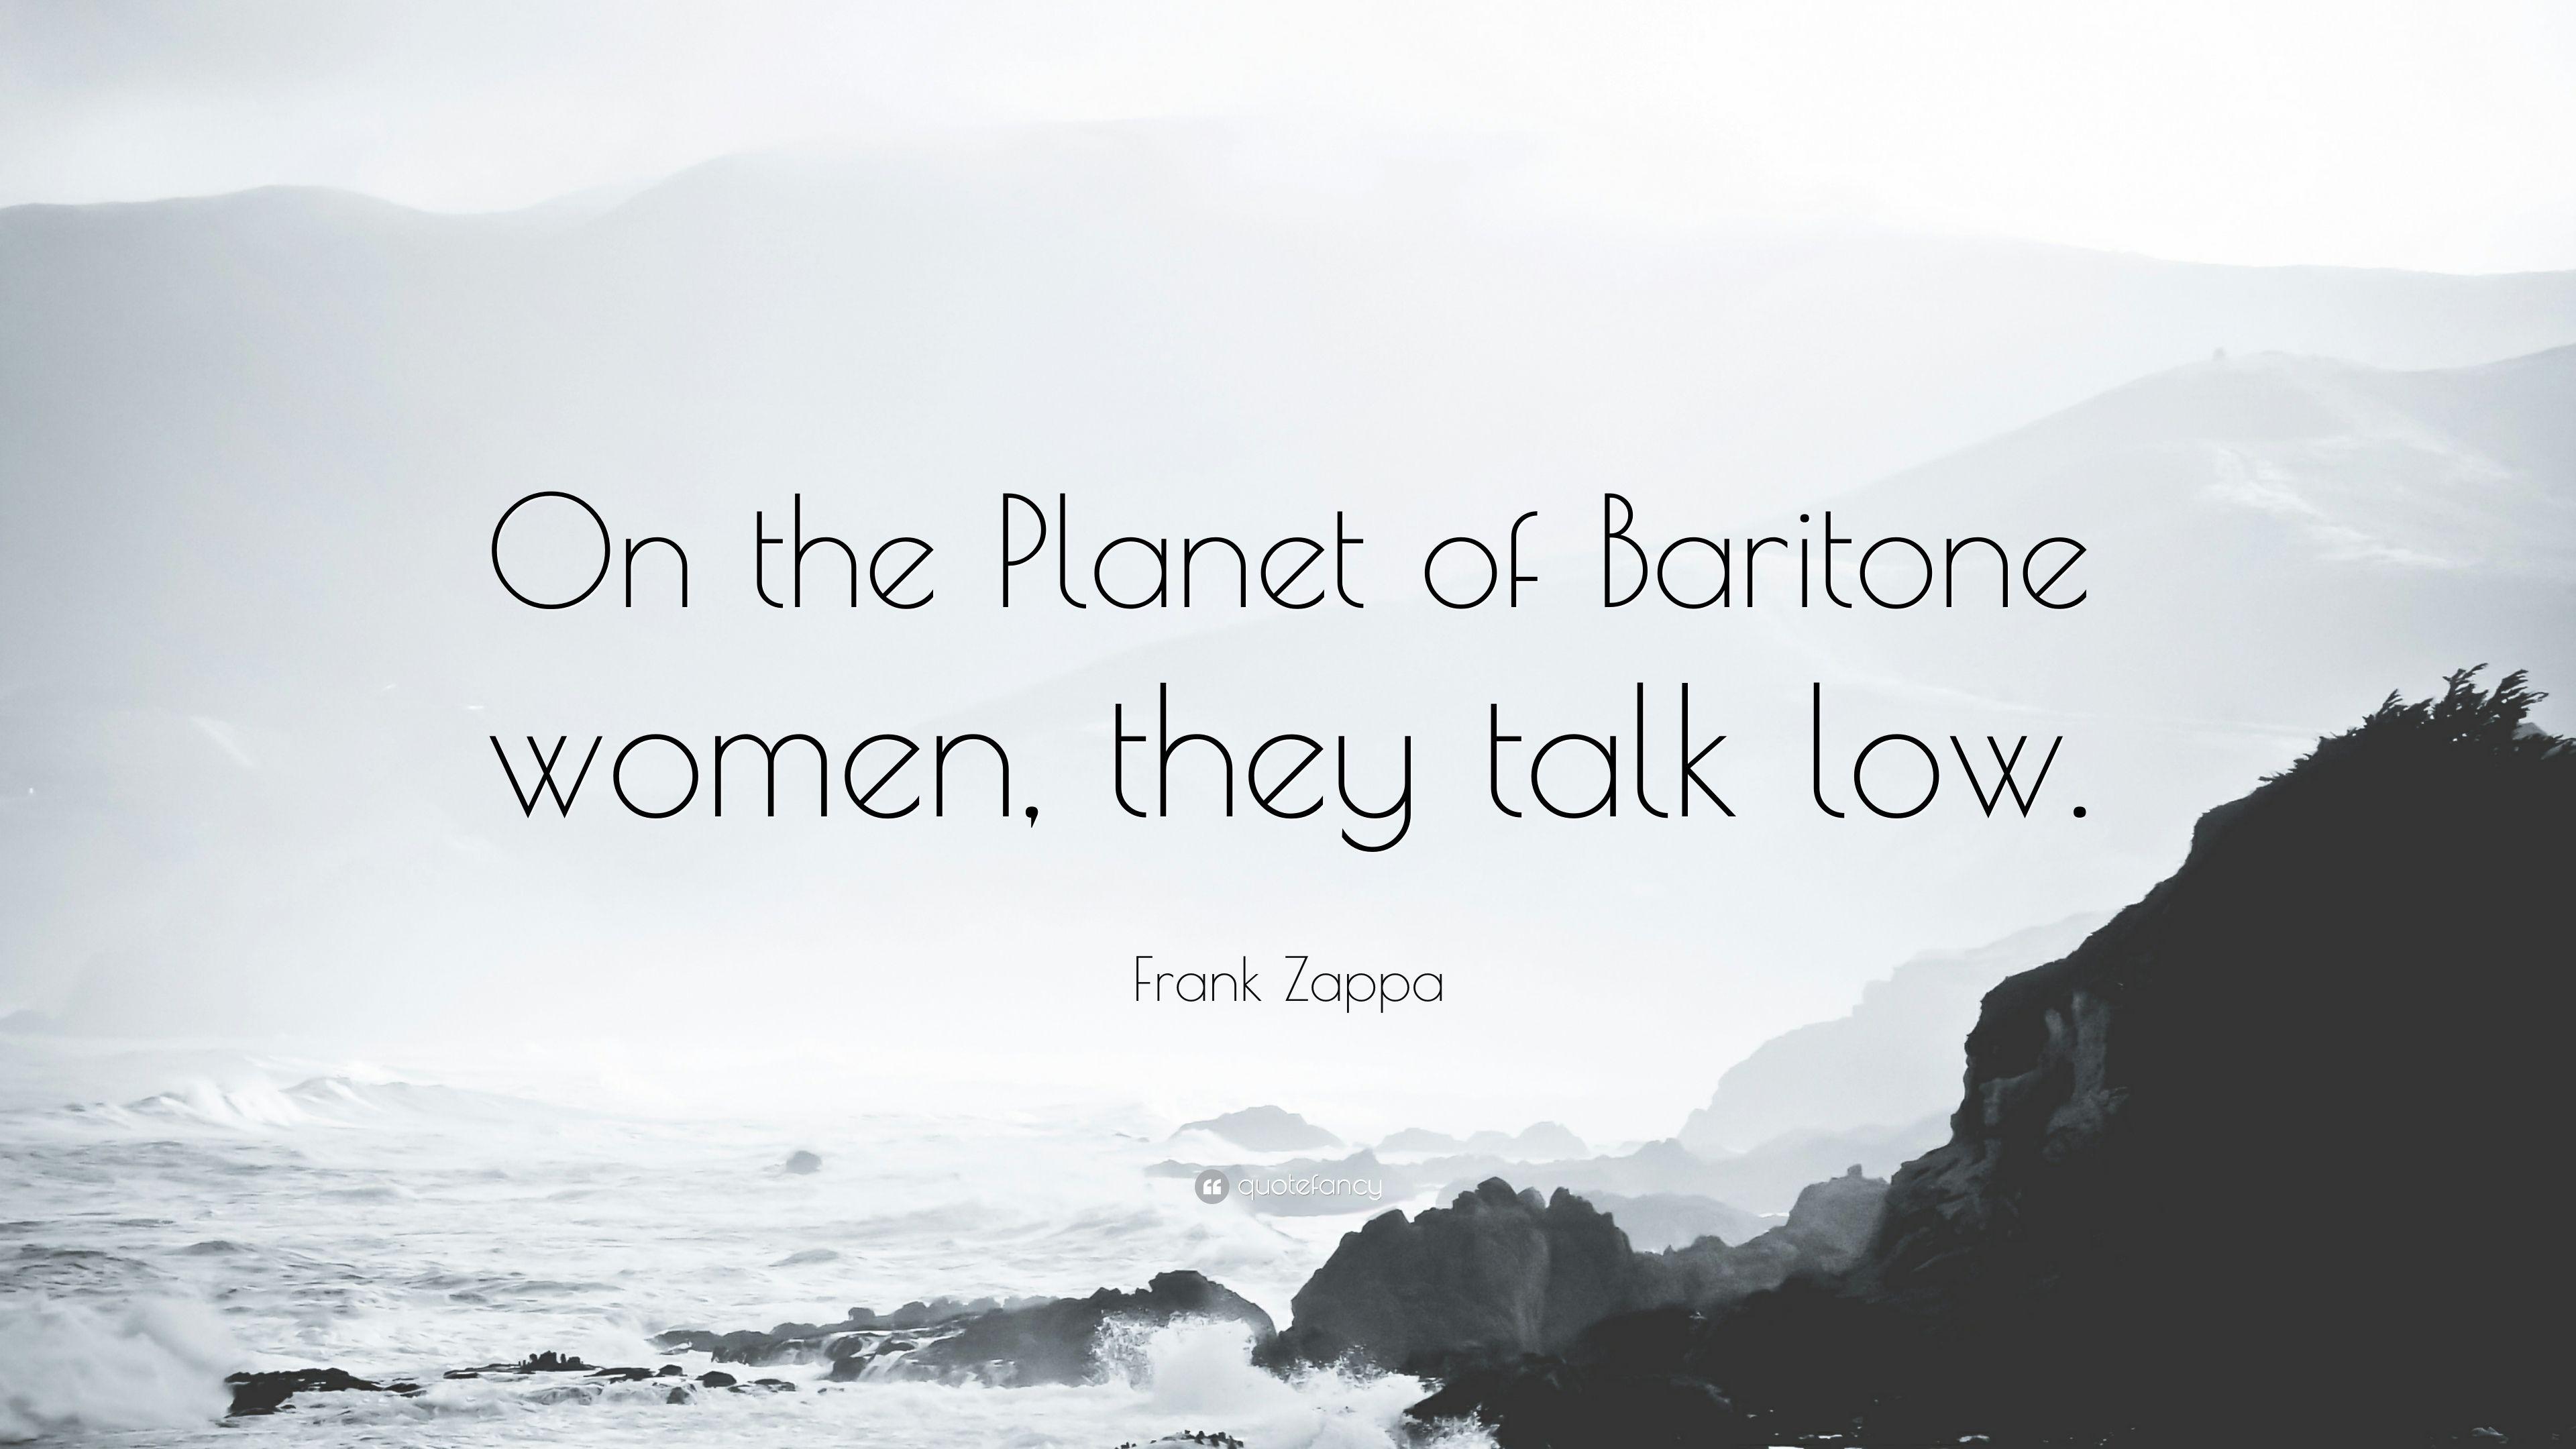 Frank Zappa Quote: “On the Planet of Baritone women, they talk low